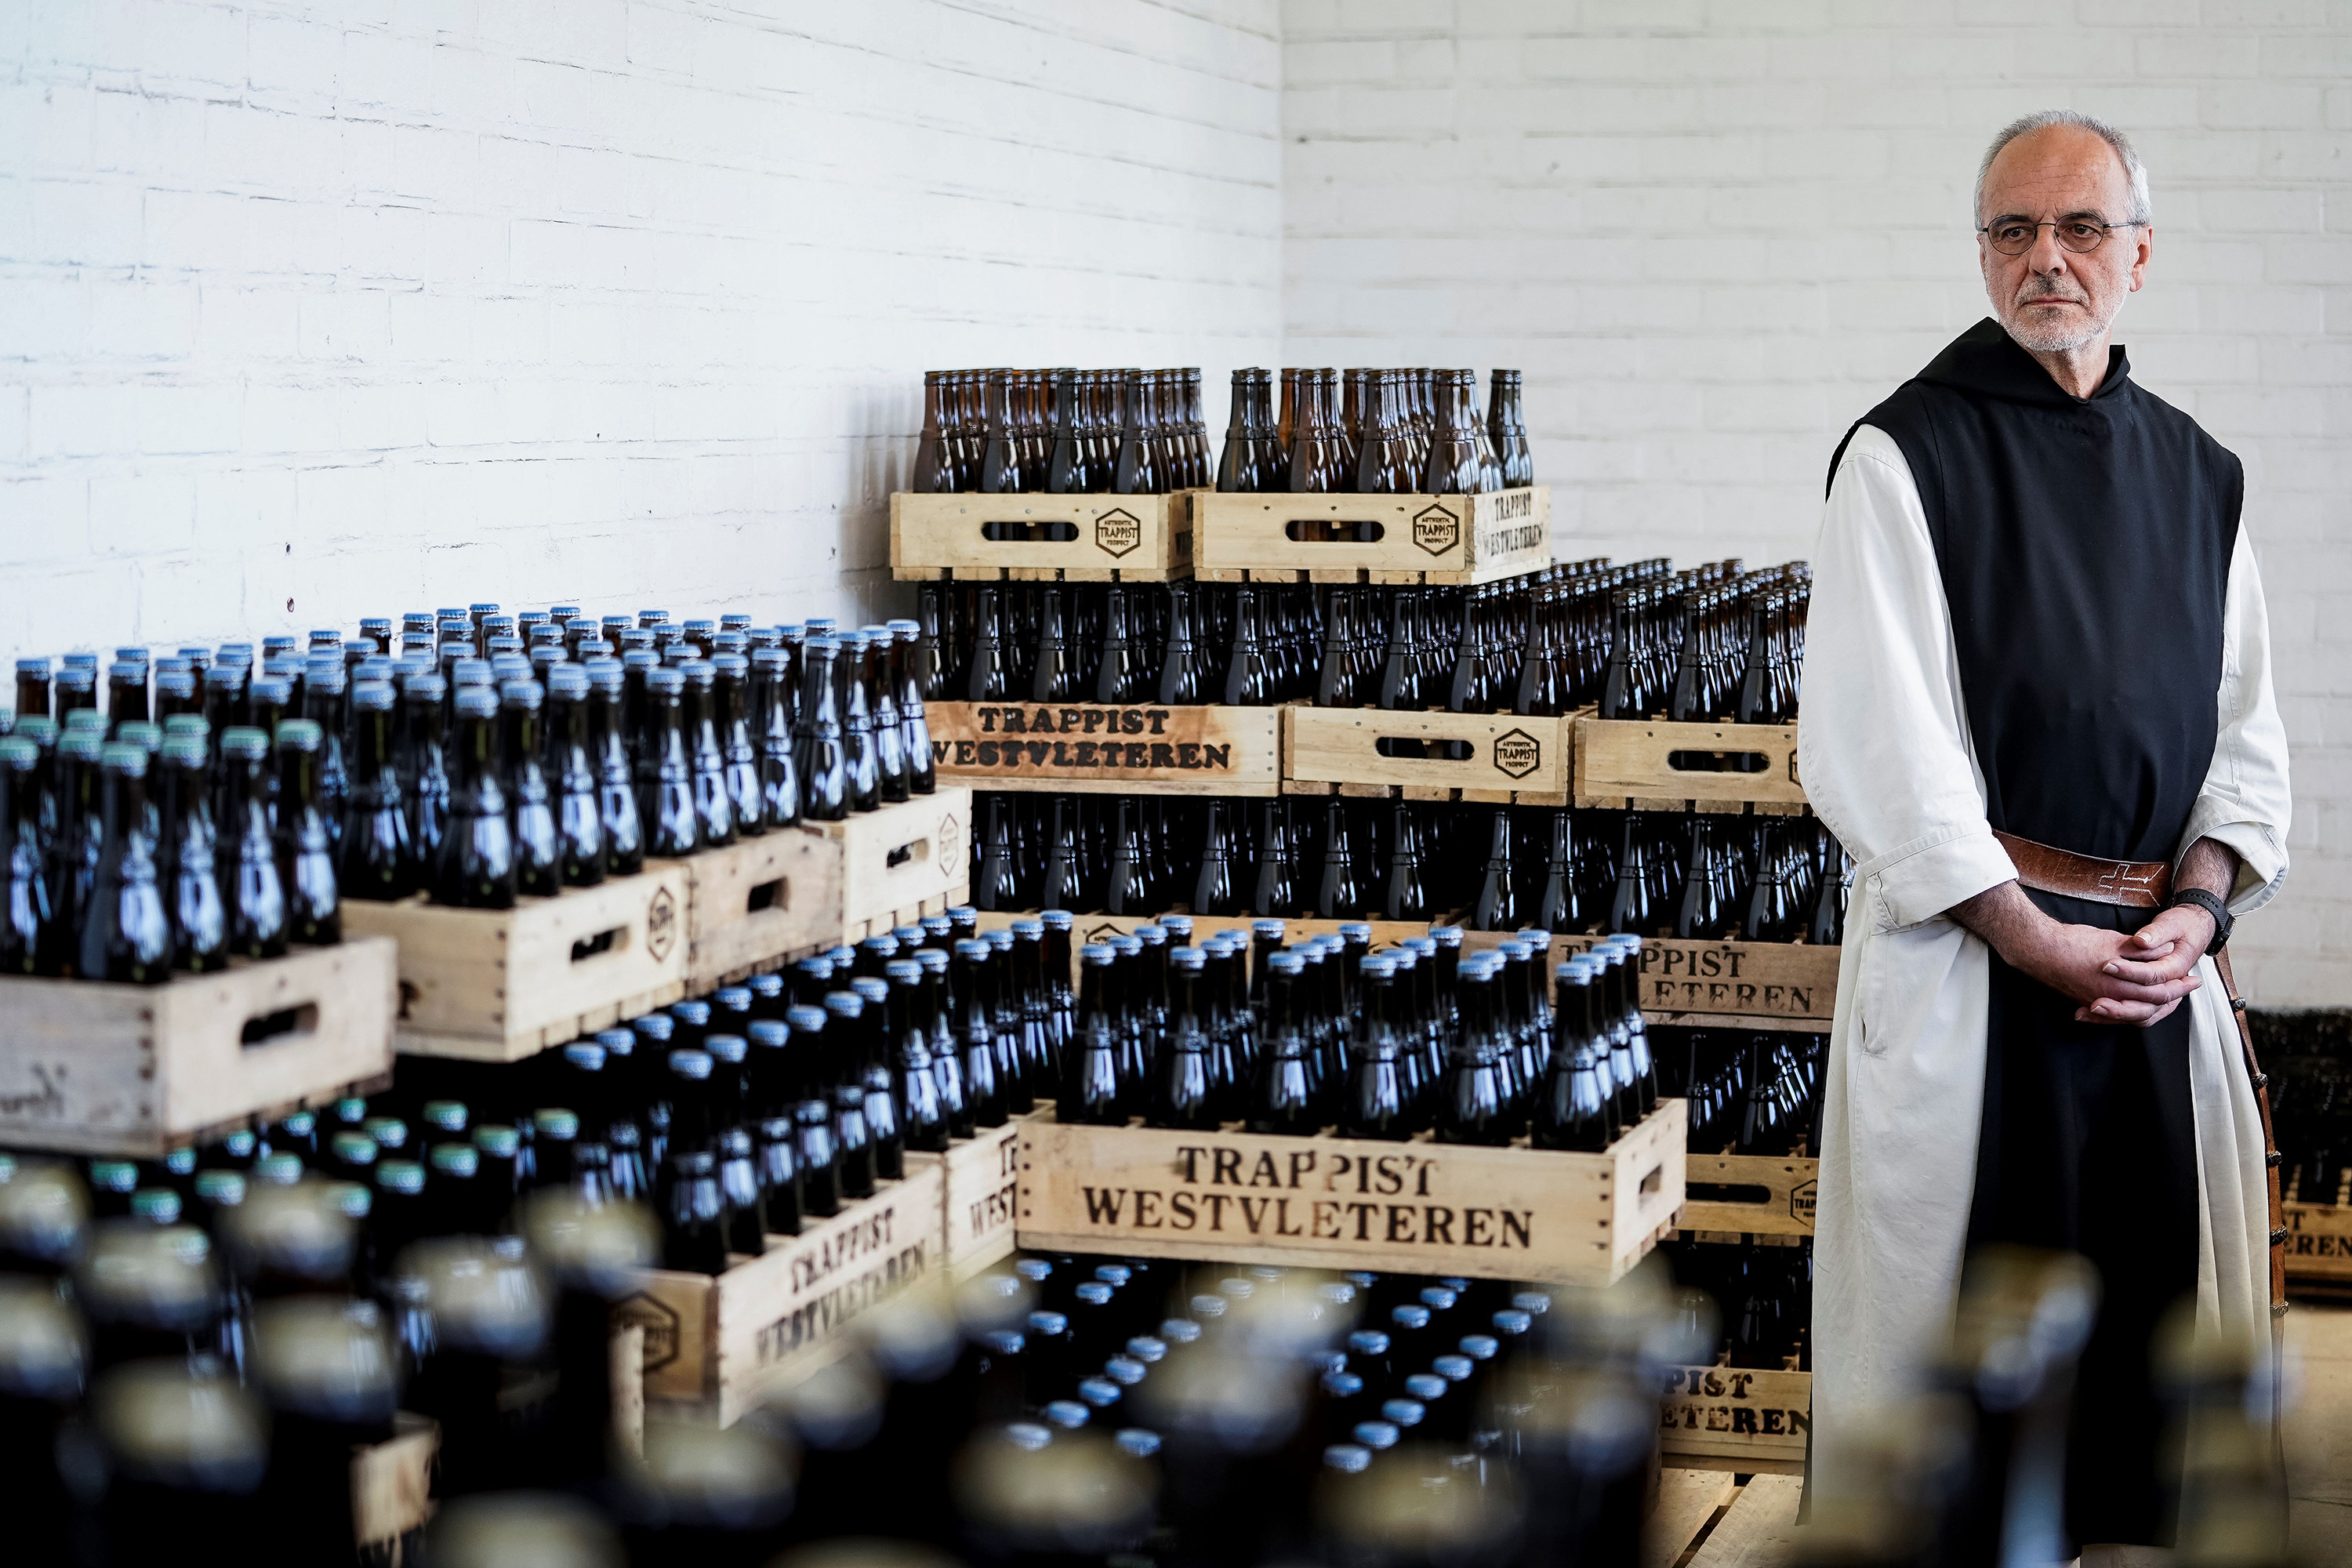 A monk poses by crates of Westvleteren beers at the shop at the Saint-Sixtus abbey, in Westvleteren, Belgium, on May 14.